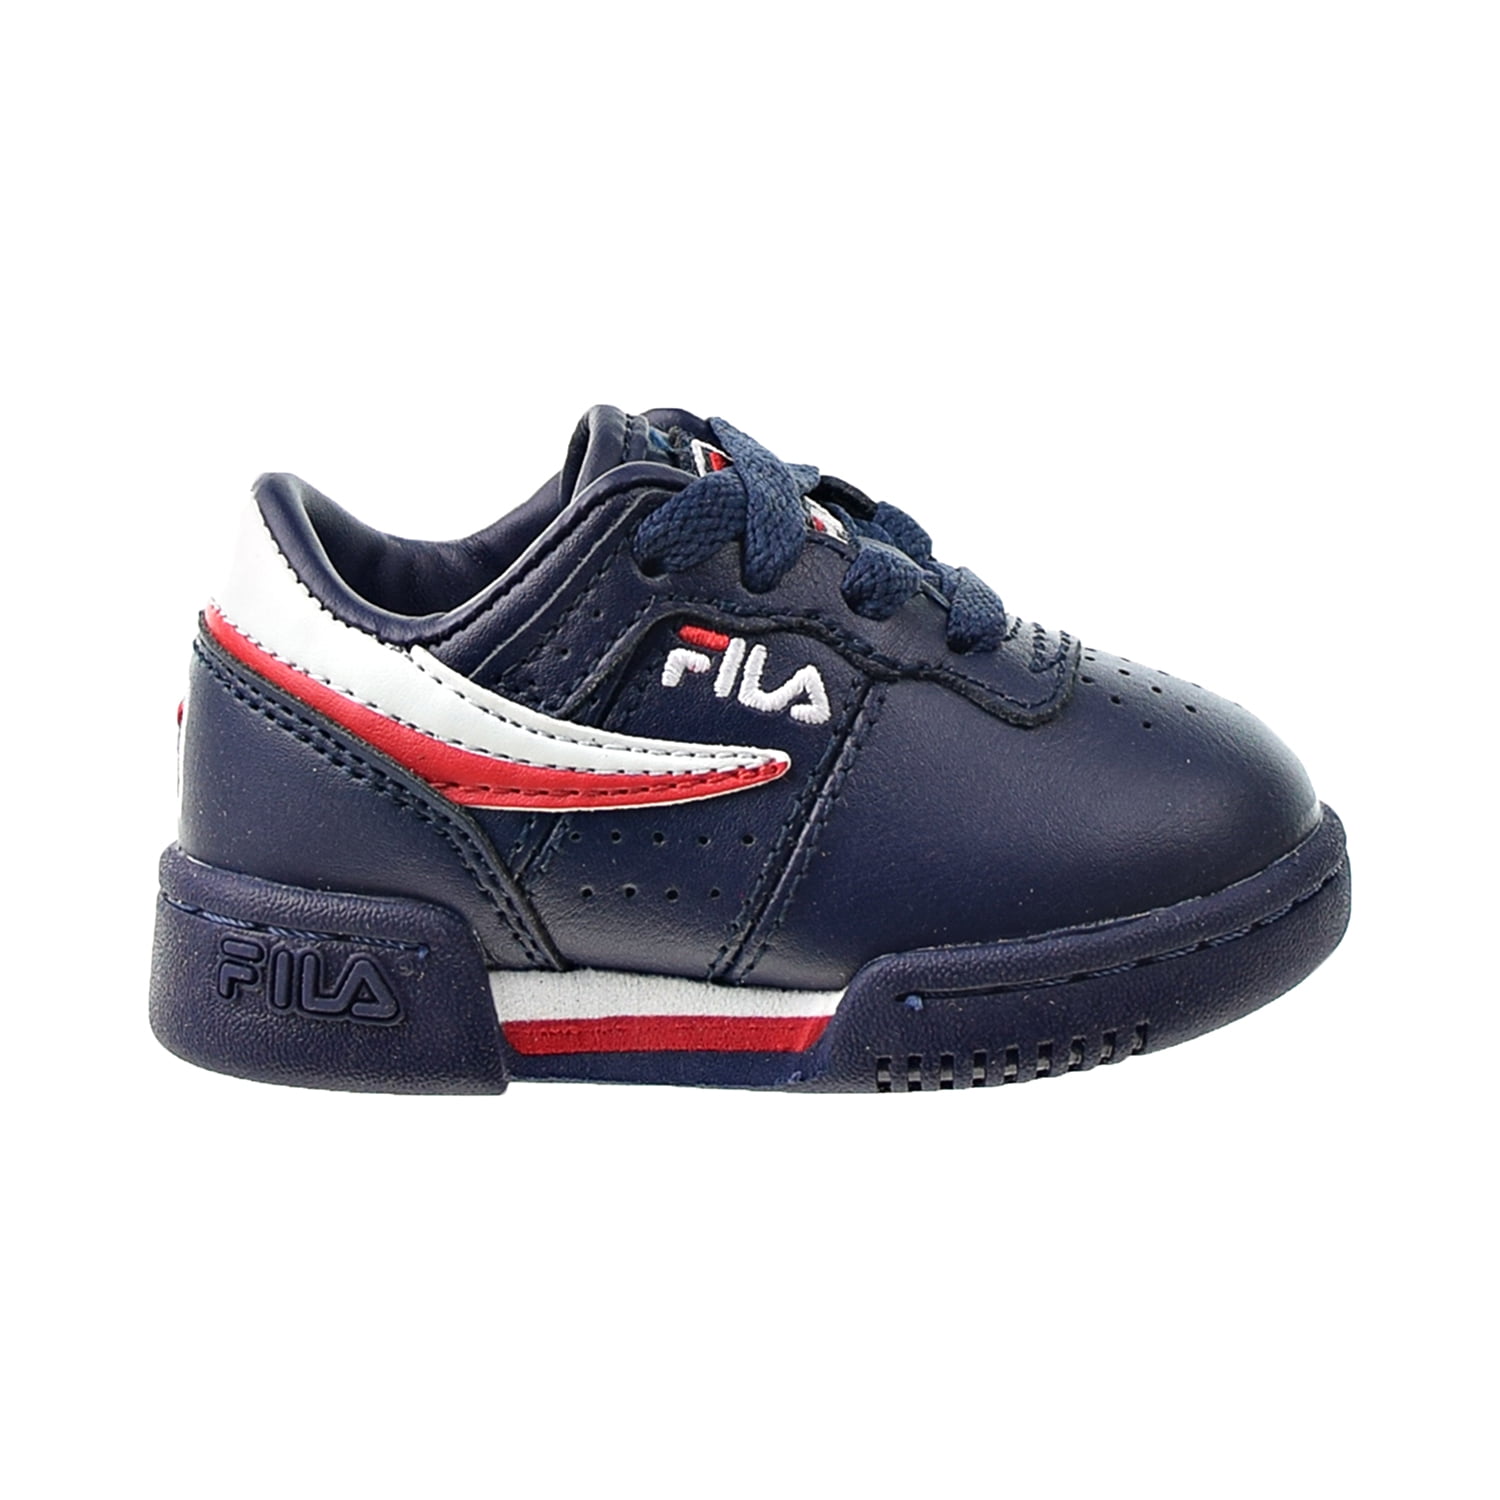 Fila Original Fitness 7VF80105-460 Navy/Red Leahter Toddler Shoes 